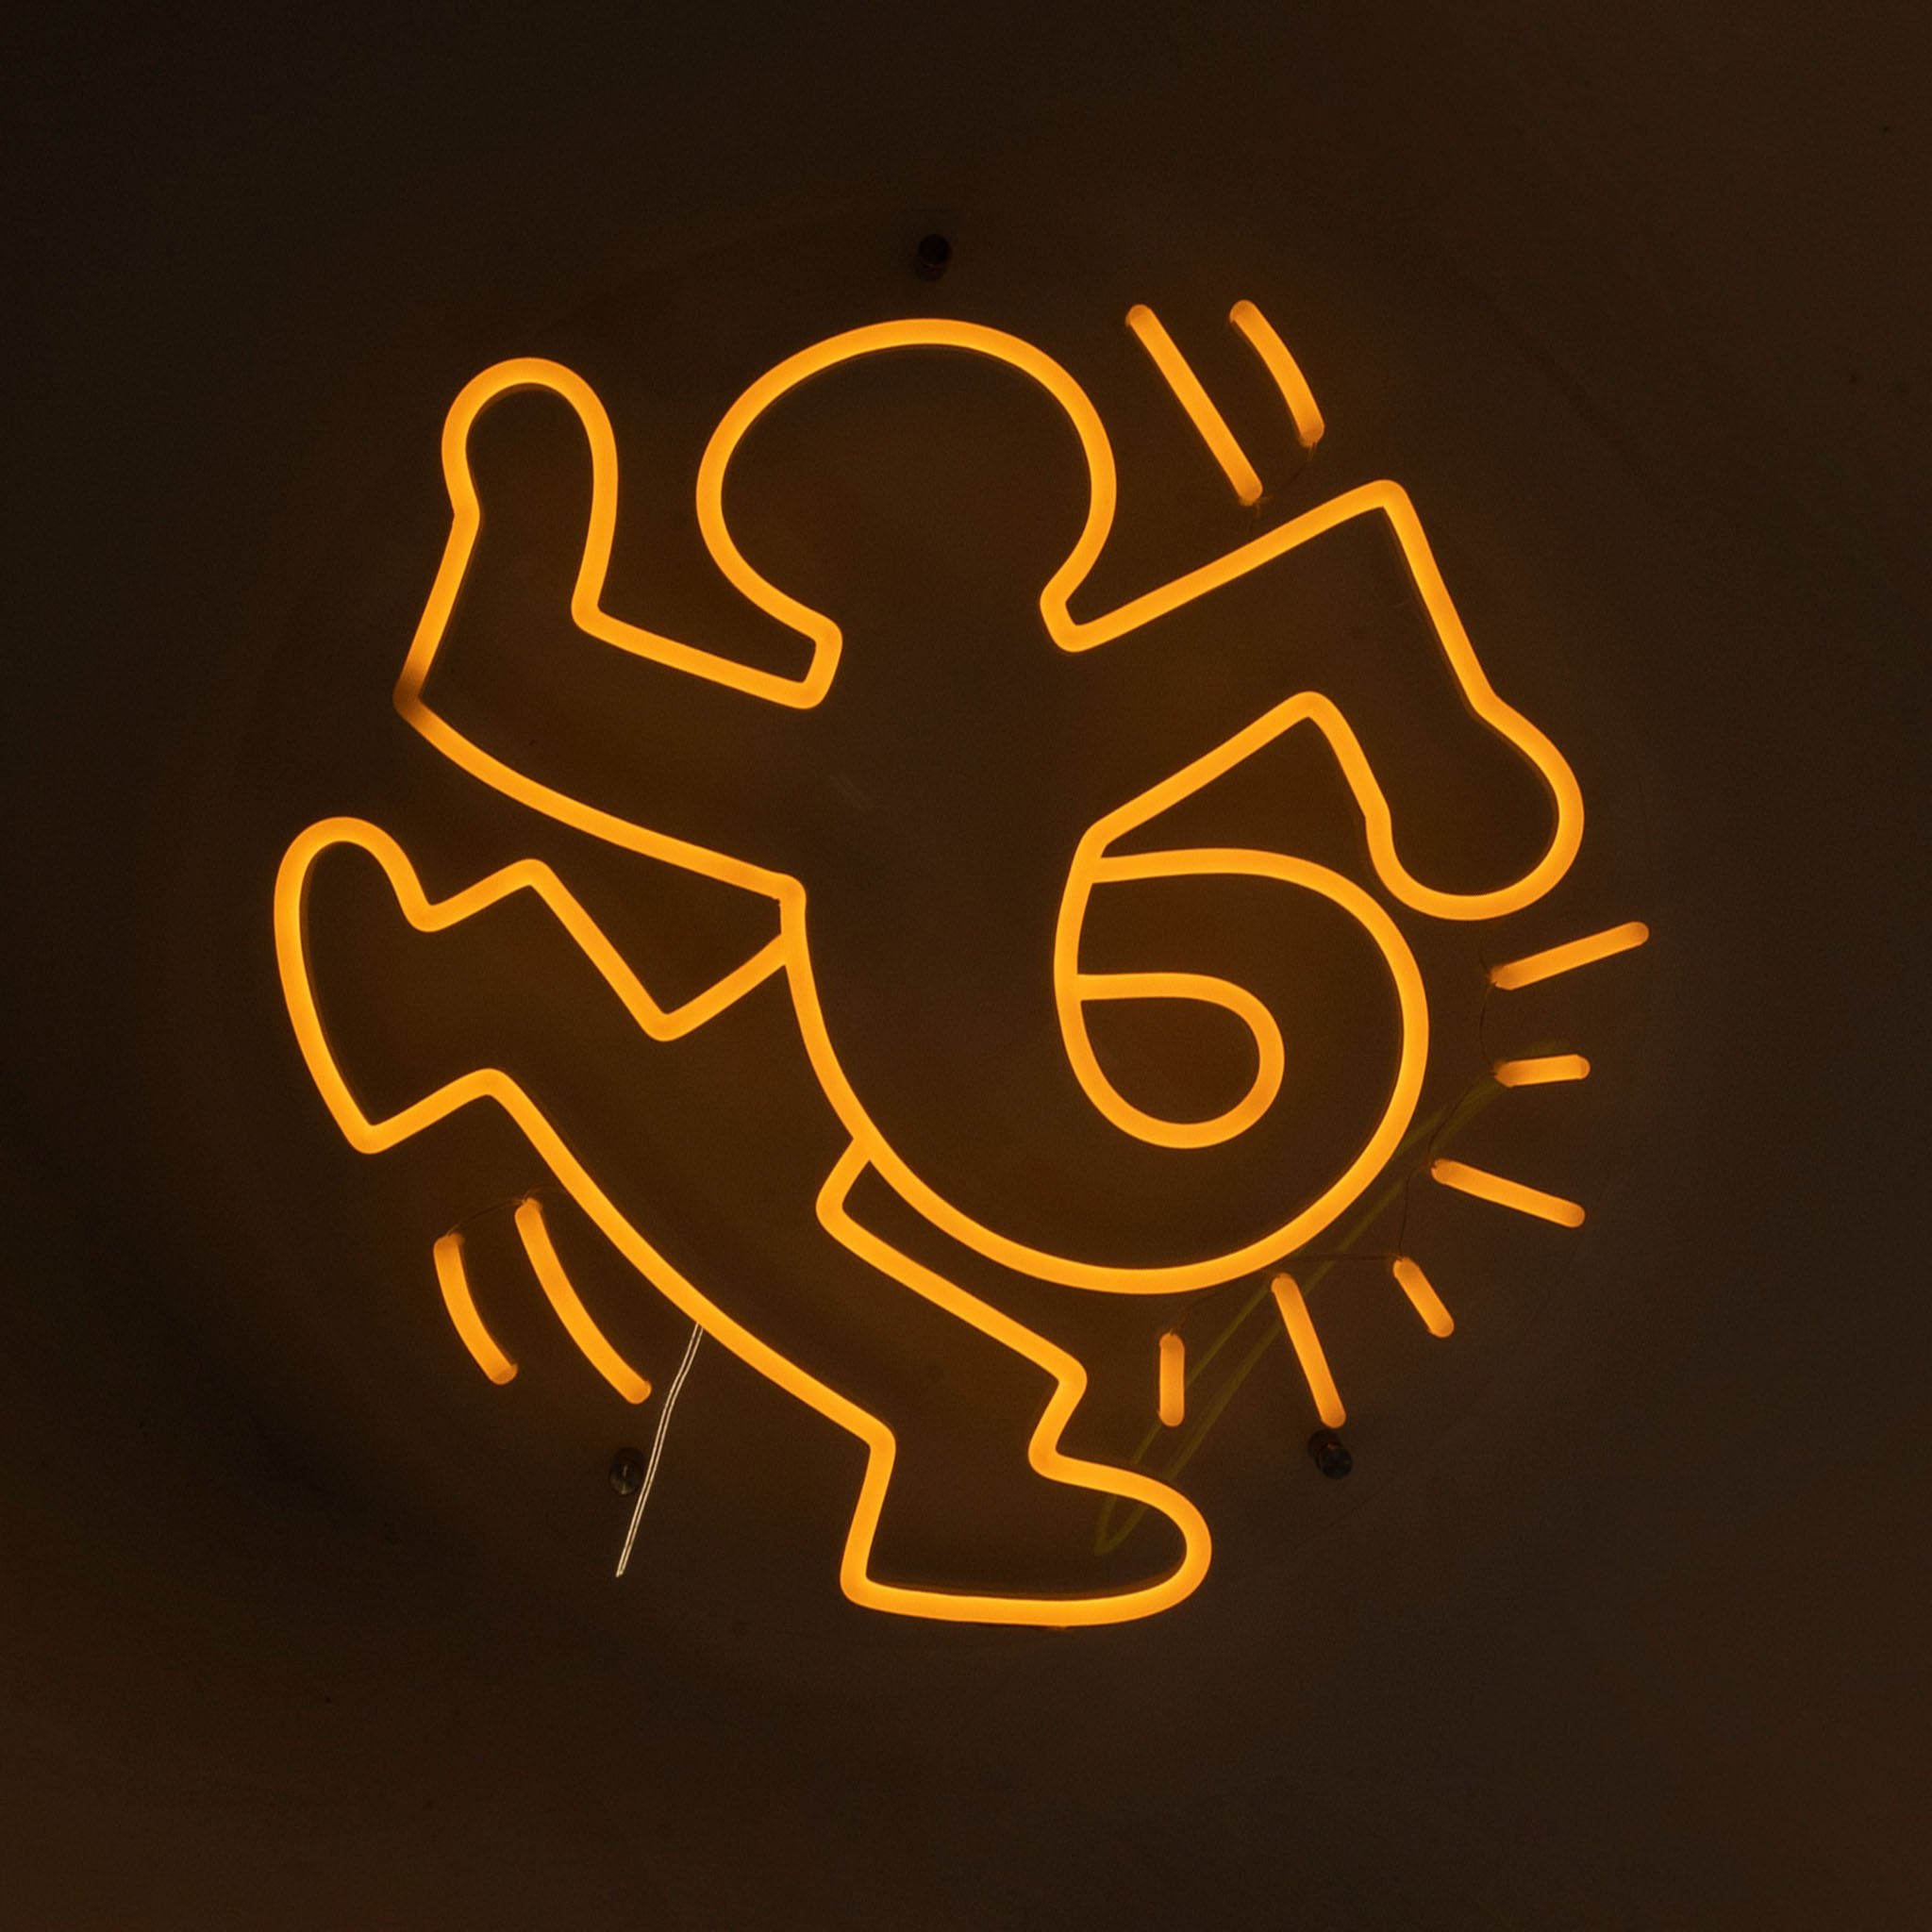 Twisted Man by Keith Haring - LED Neon Sign